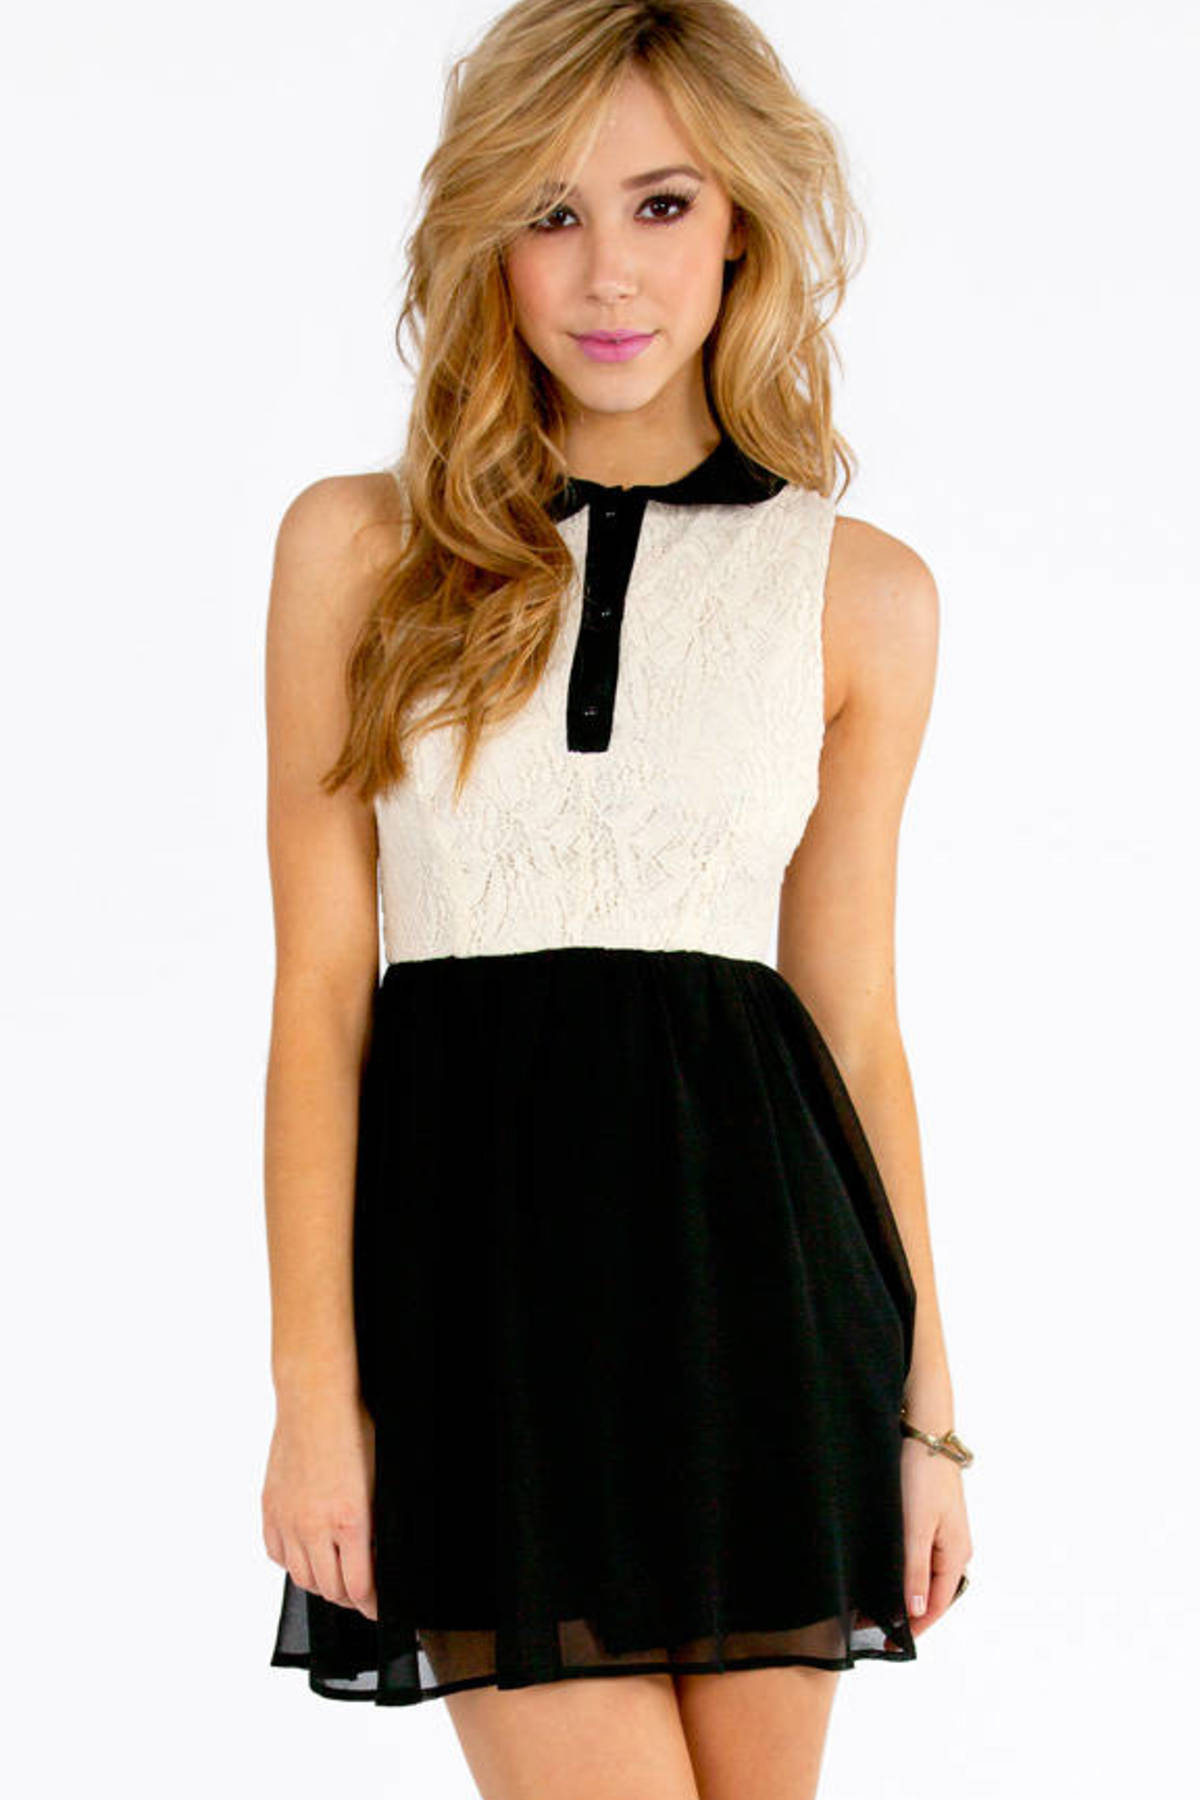 Reign On Lace Skater Dress In Ivory And Black 13 Tobi Us 